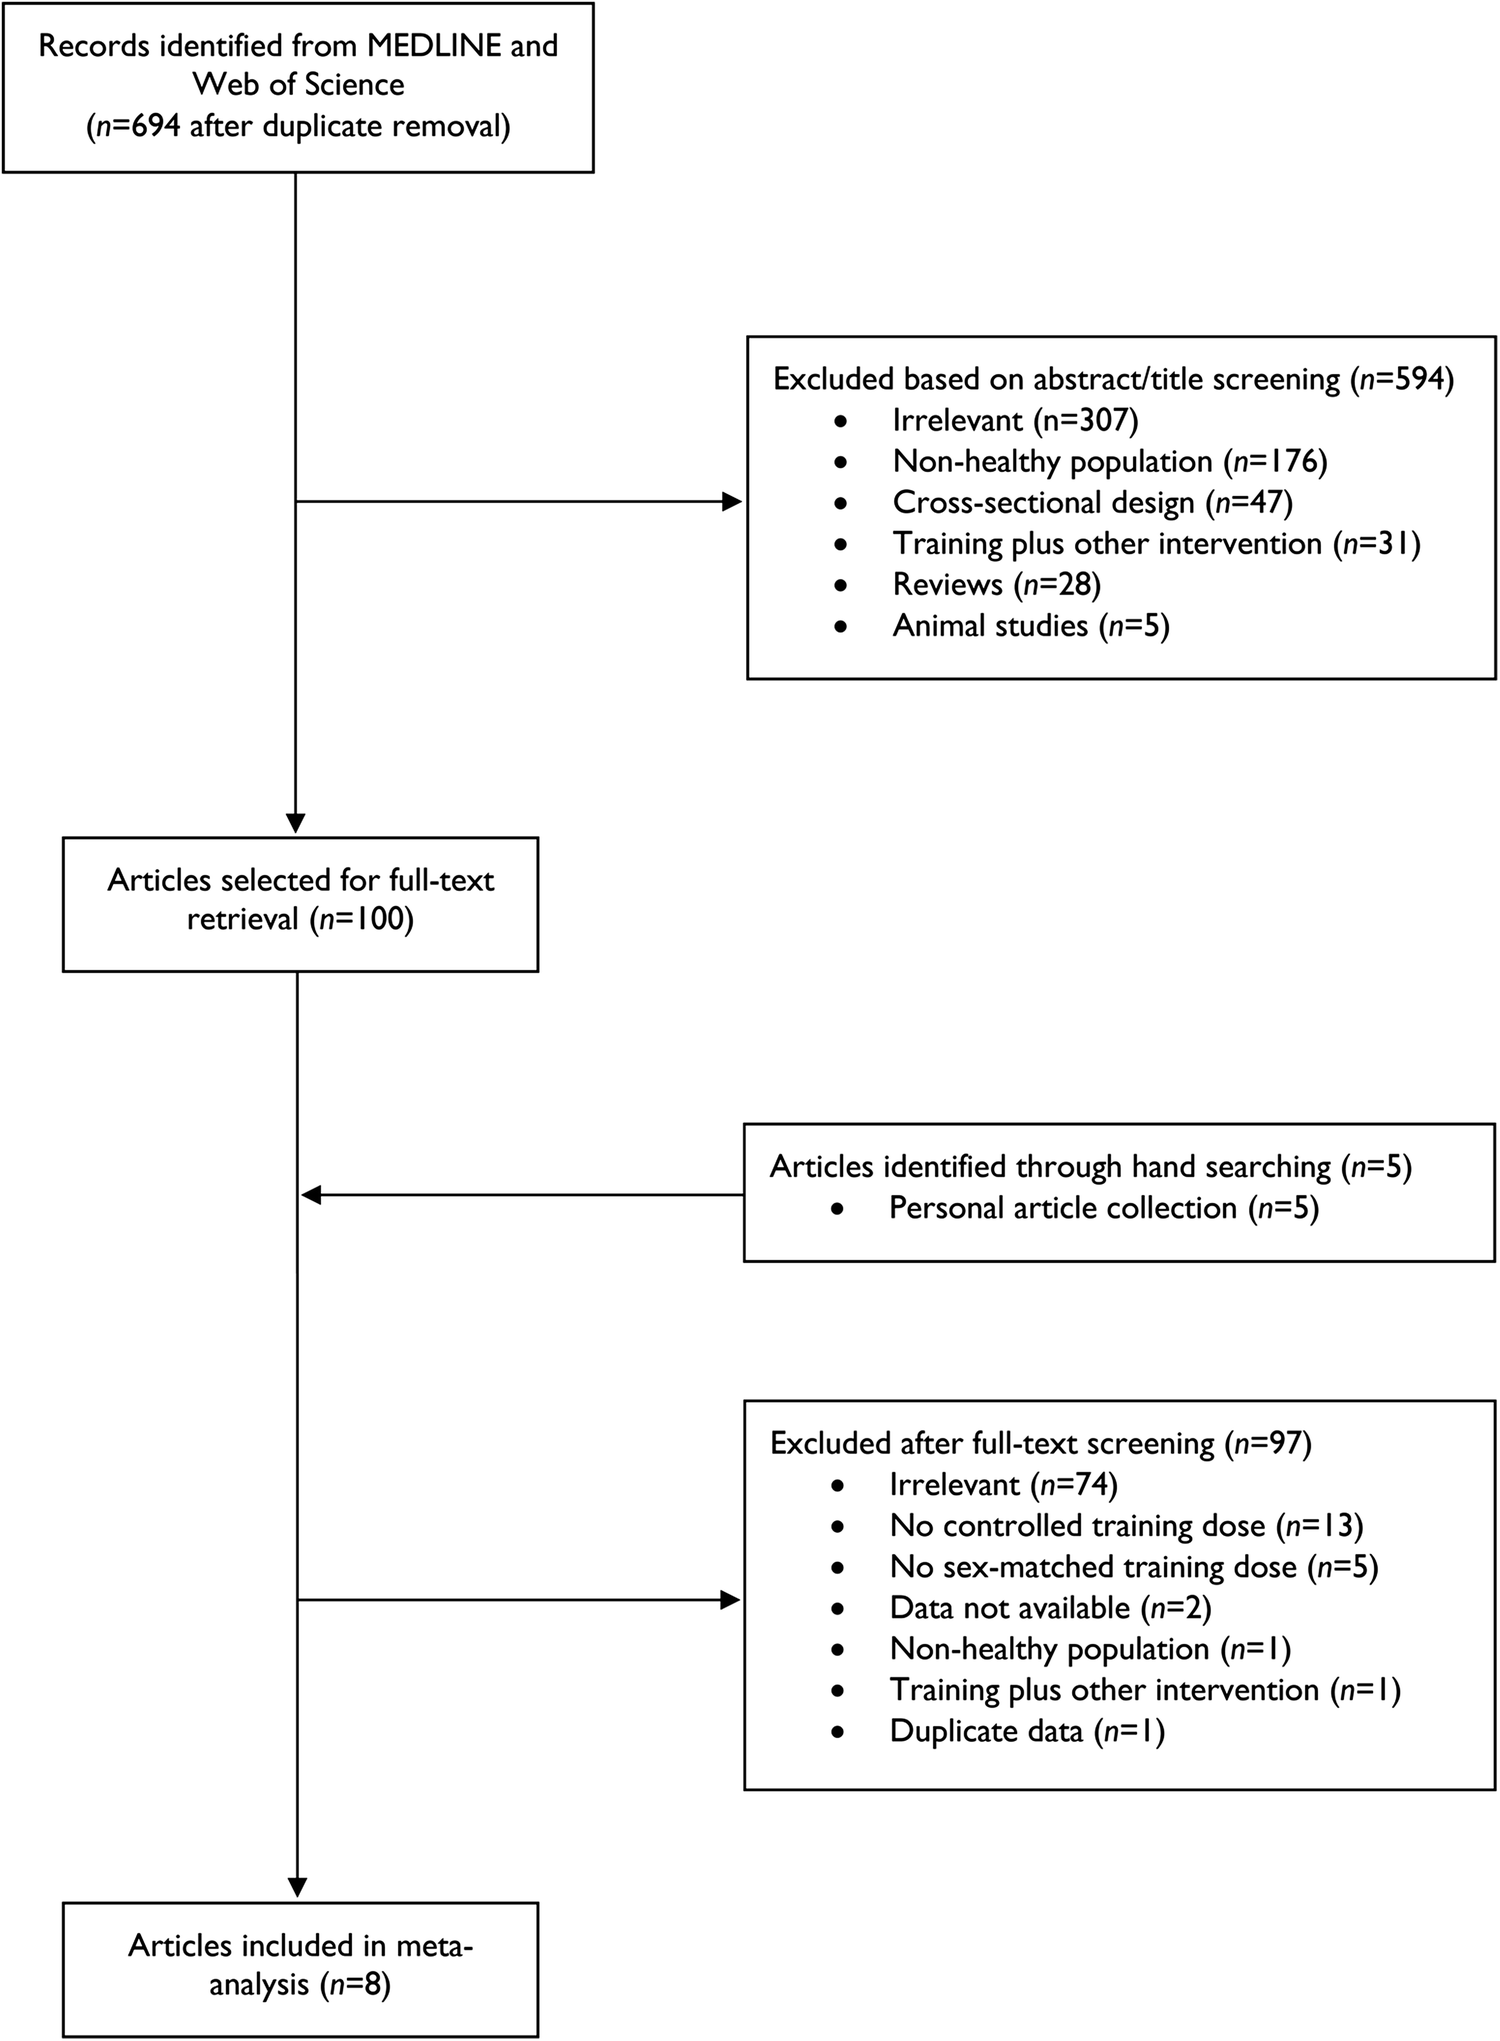 Sex Dimorphism Of Vo2max Trainability A Systematic Review And